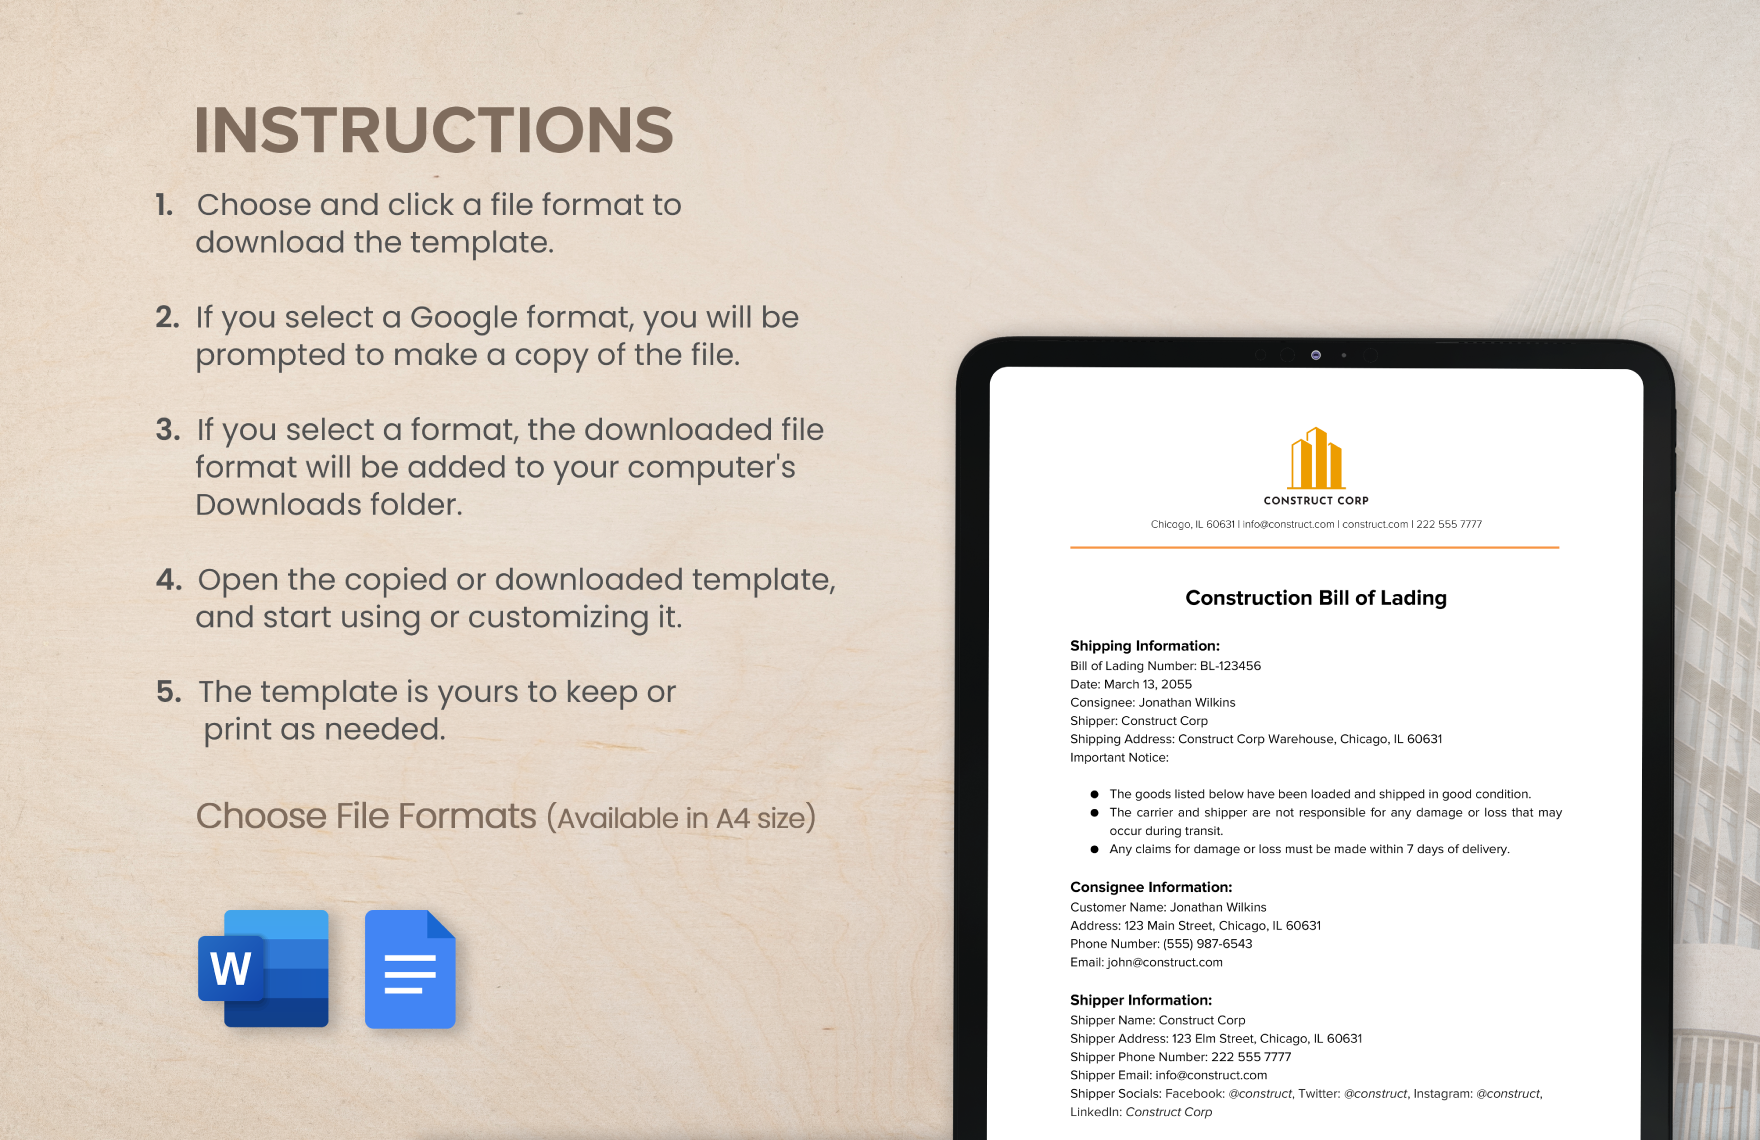  Construction Bill of Lading Template